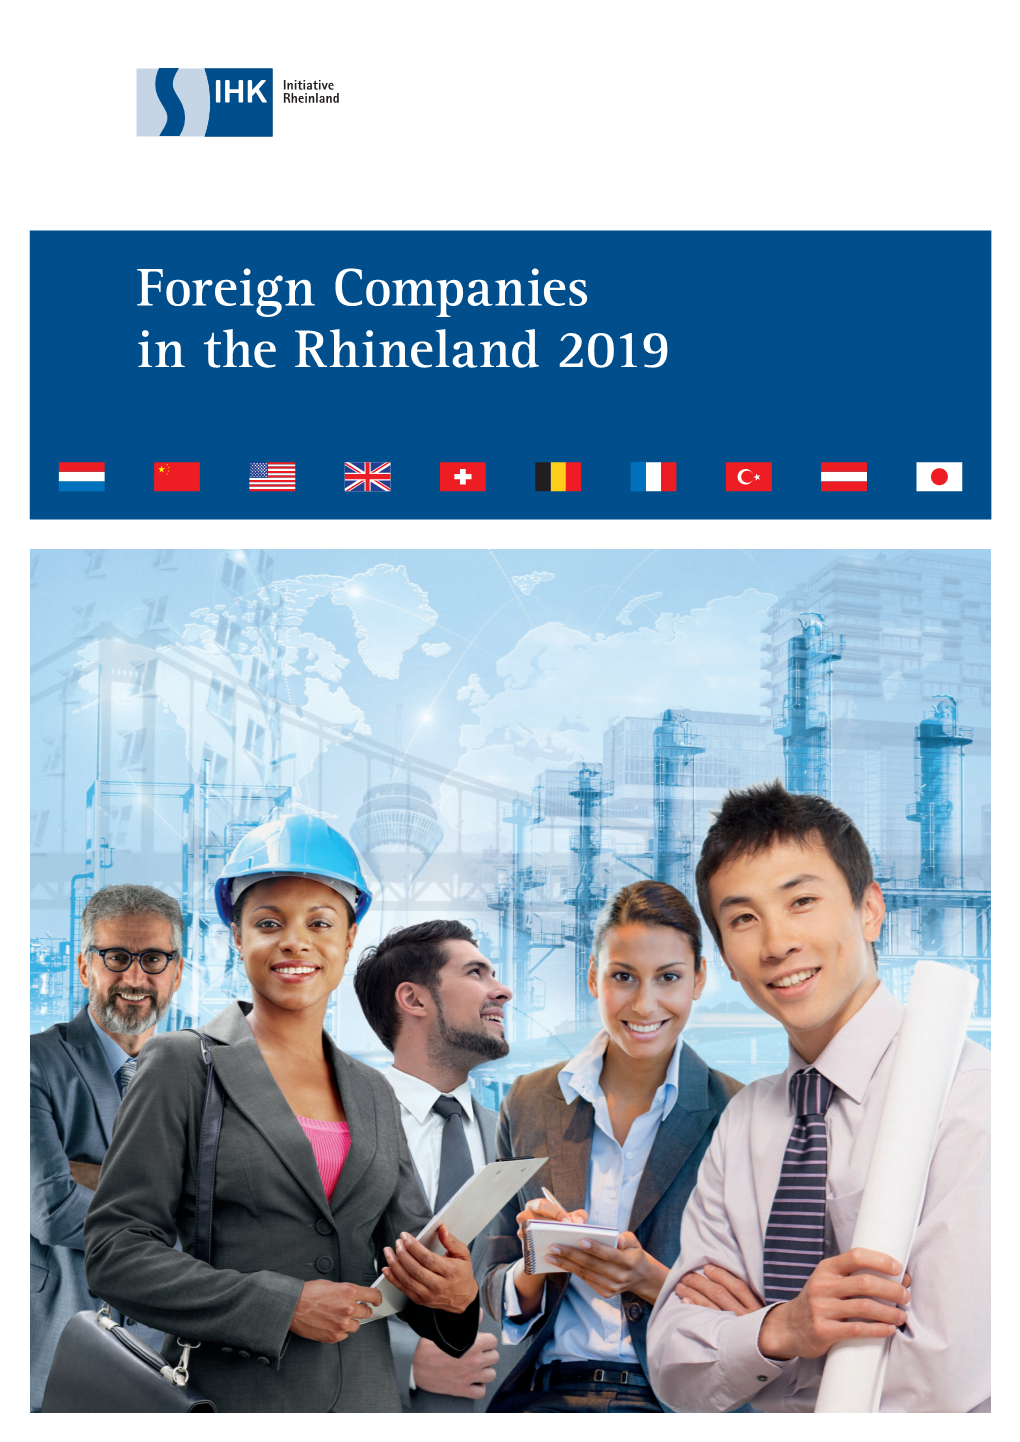 Foreign Companies in the Rhineland 2019 OBJECTIVES and METHODOLOGY of the STUDY